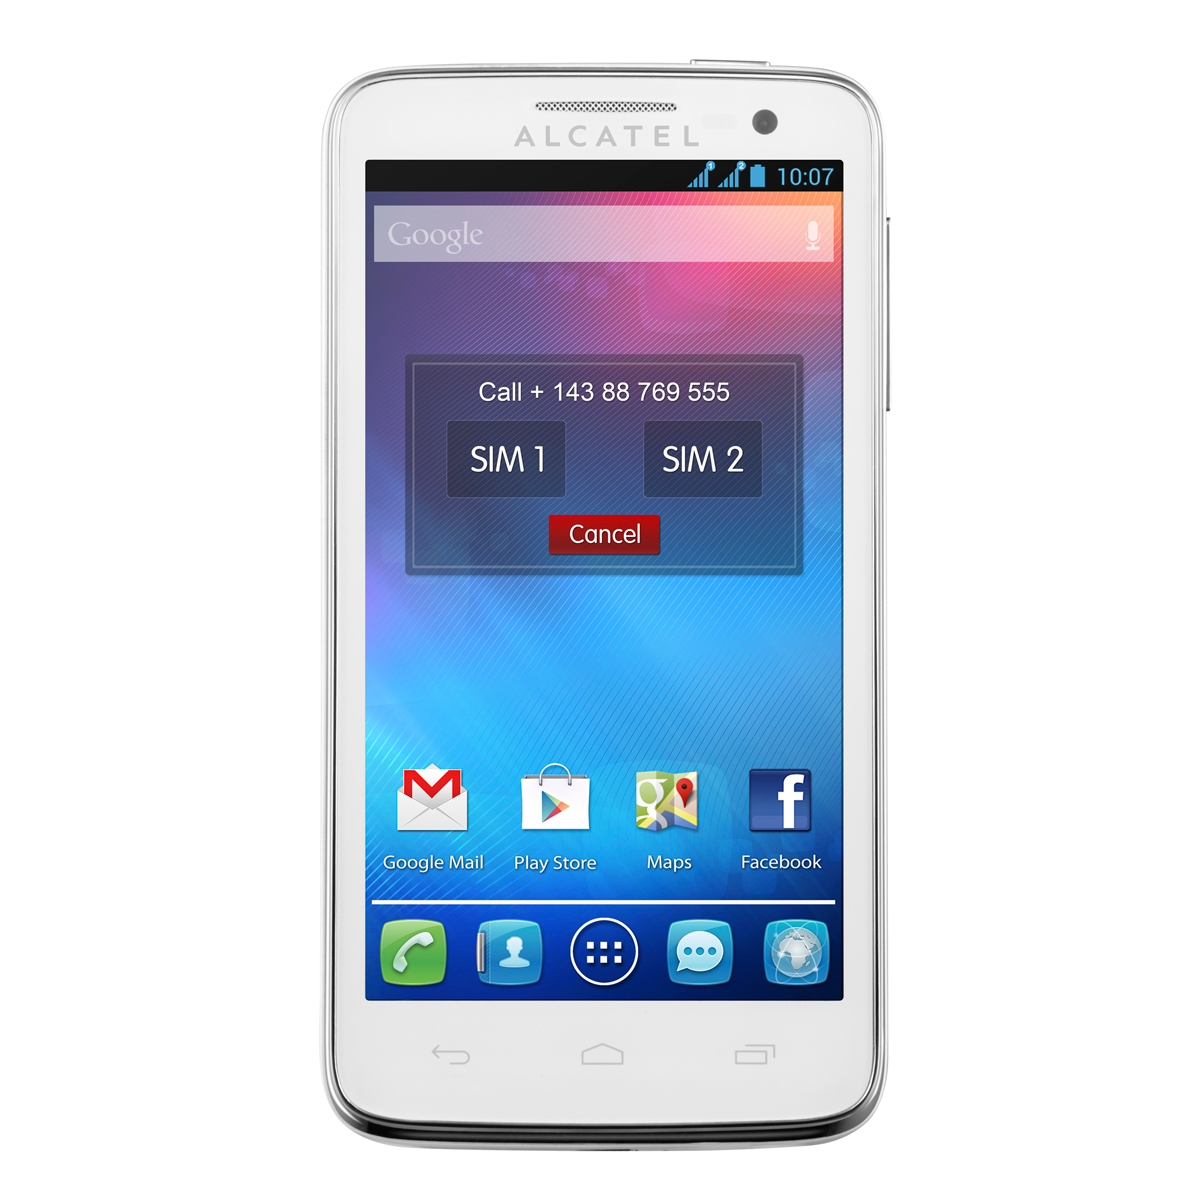 alcatel one touch 5035d software download